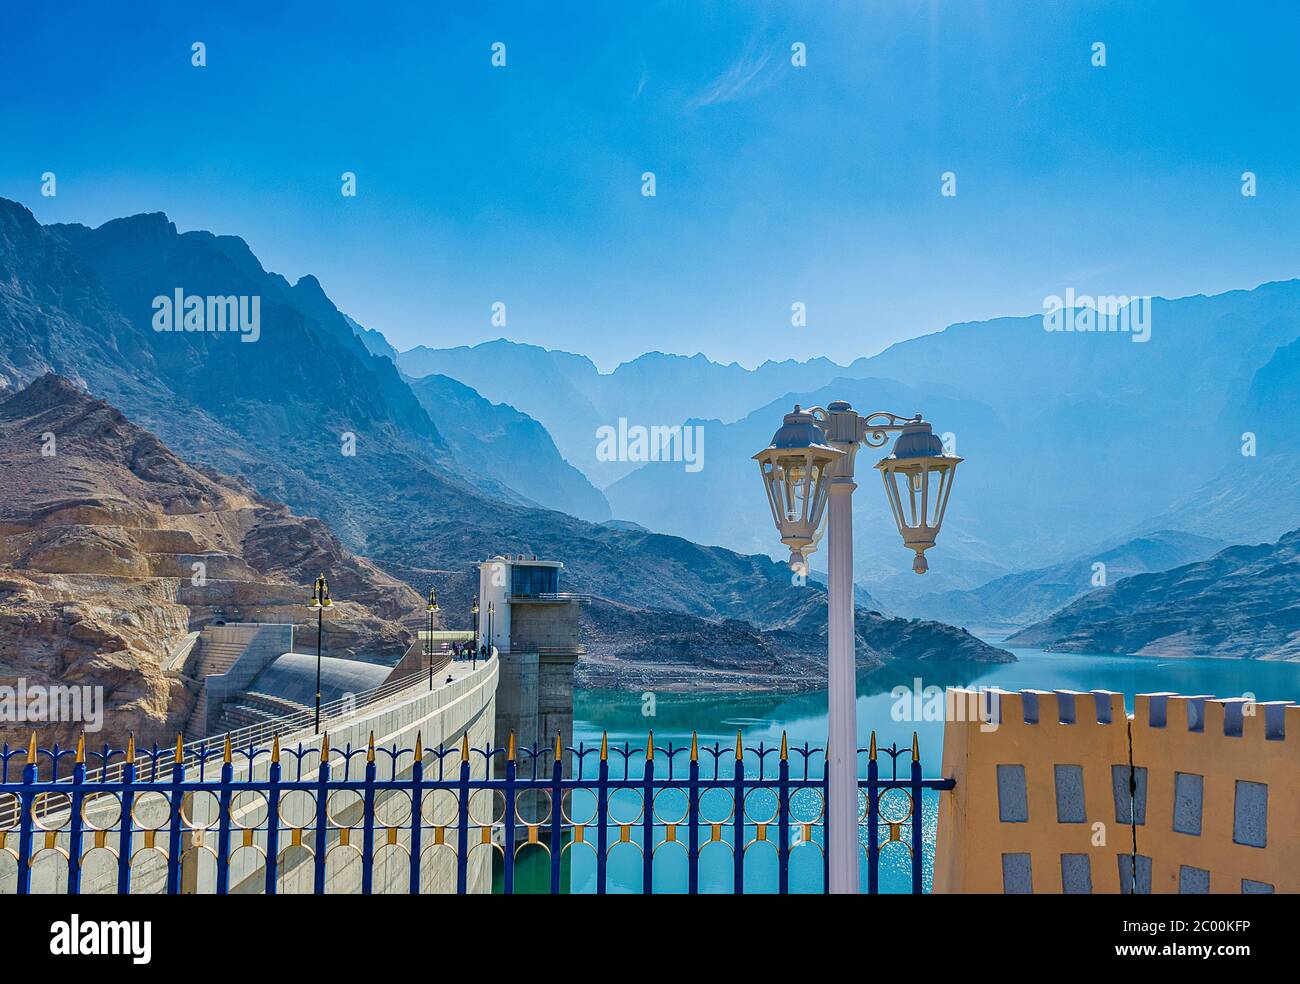 Beautiful mountains in the distance with a light pole in the foreground. From Quriyat Dam Premises, Muscat, Oman. Stock Photo